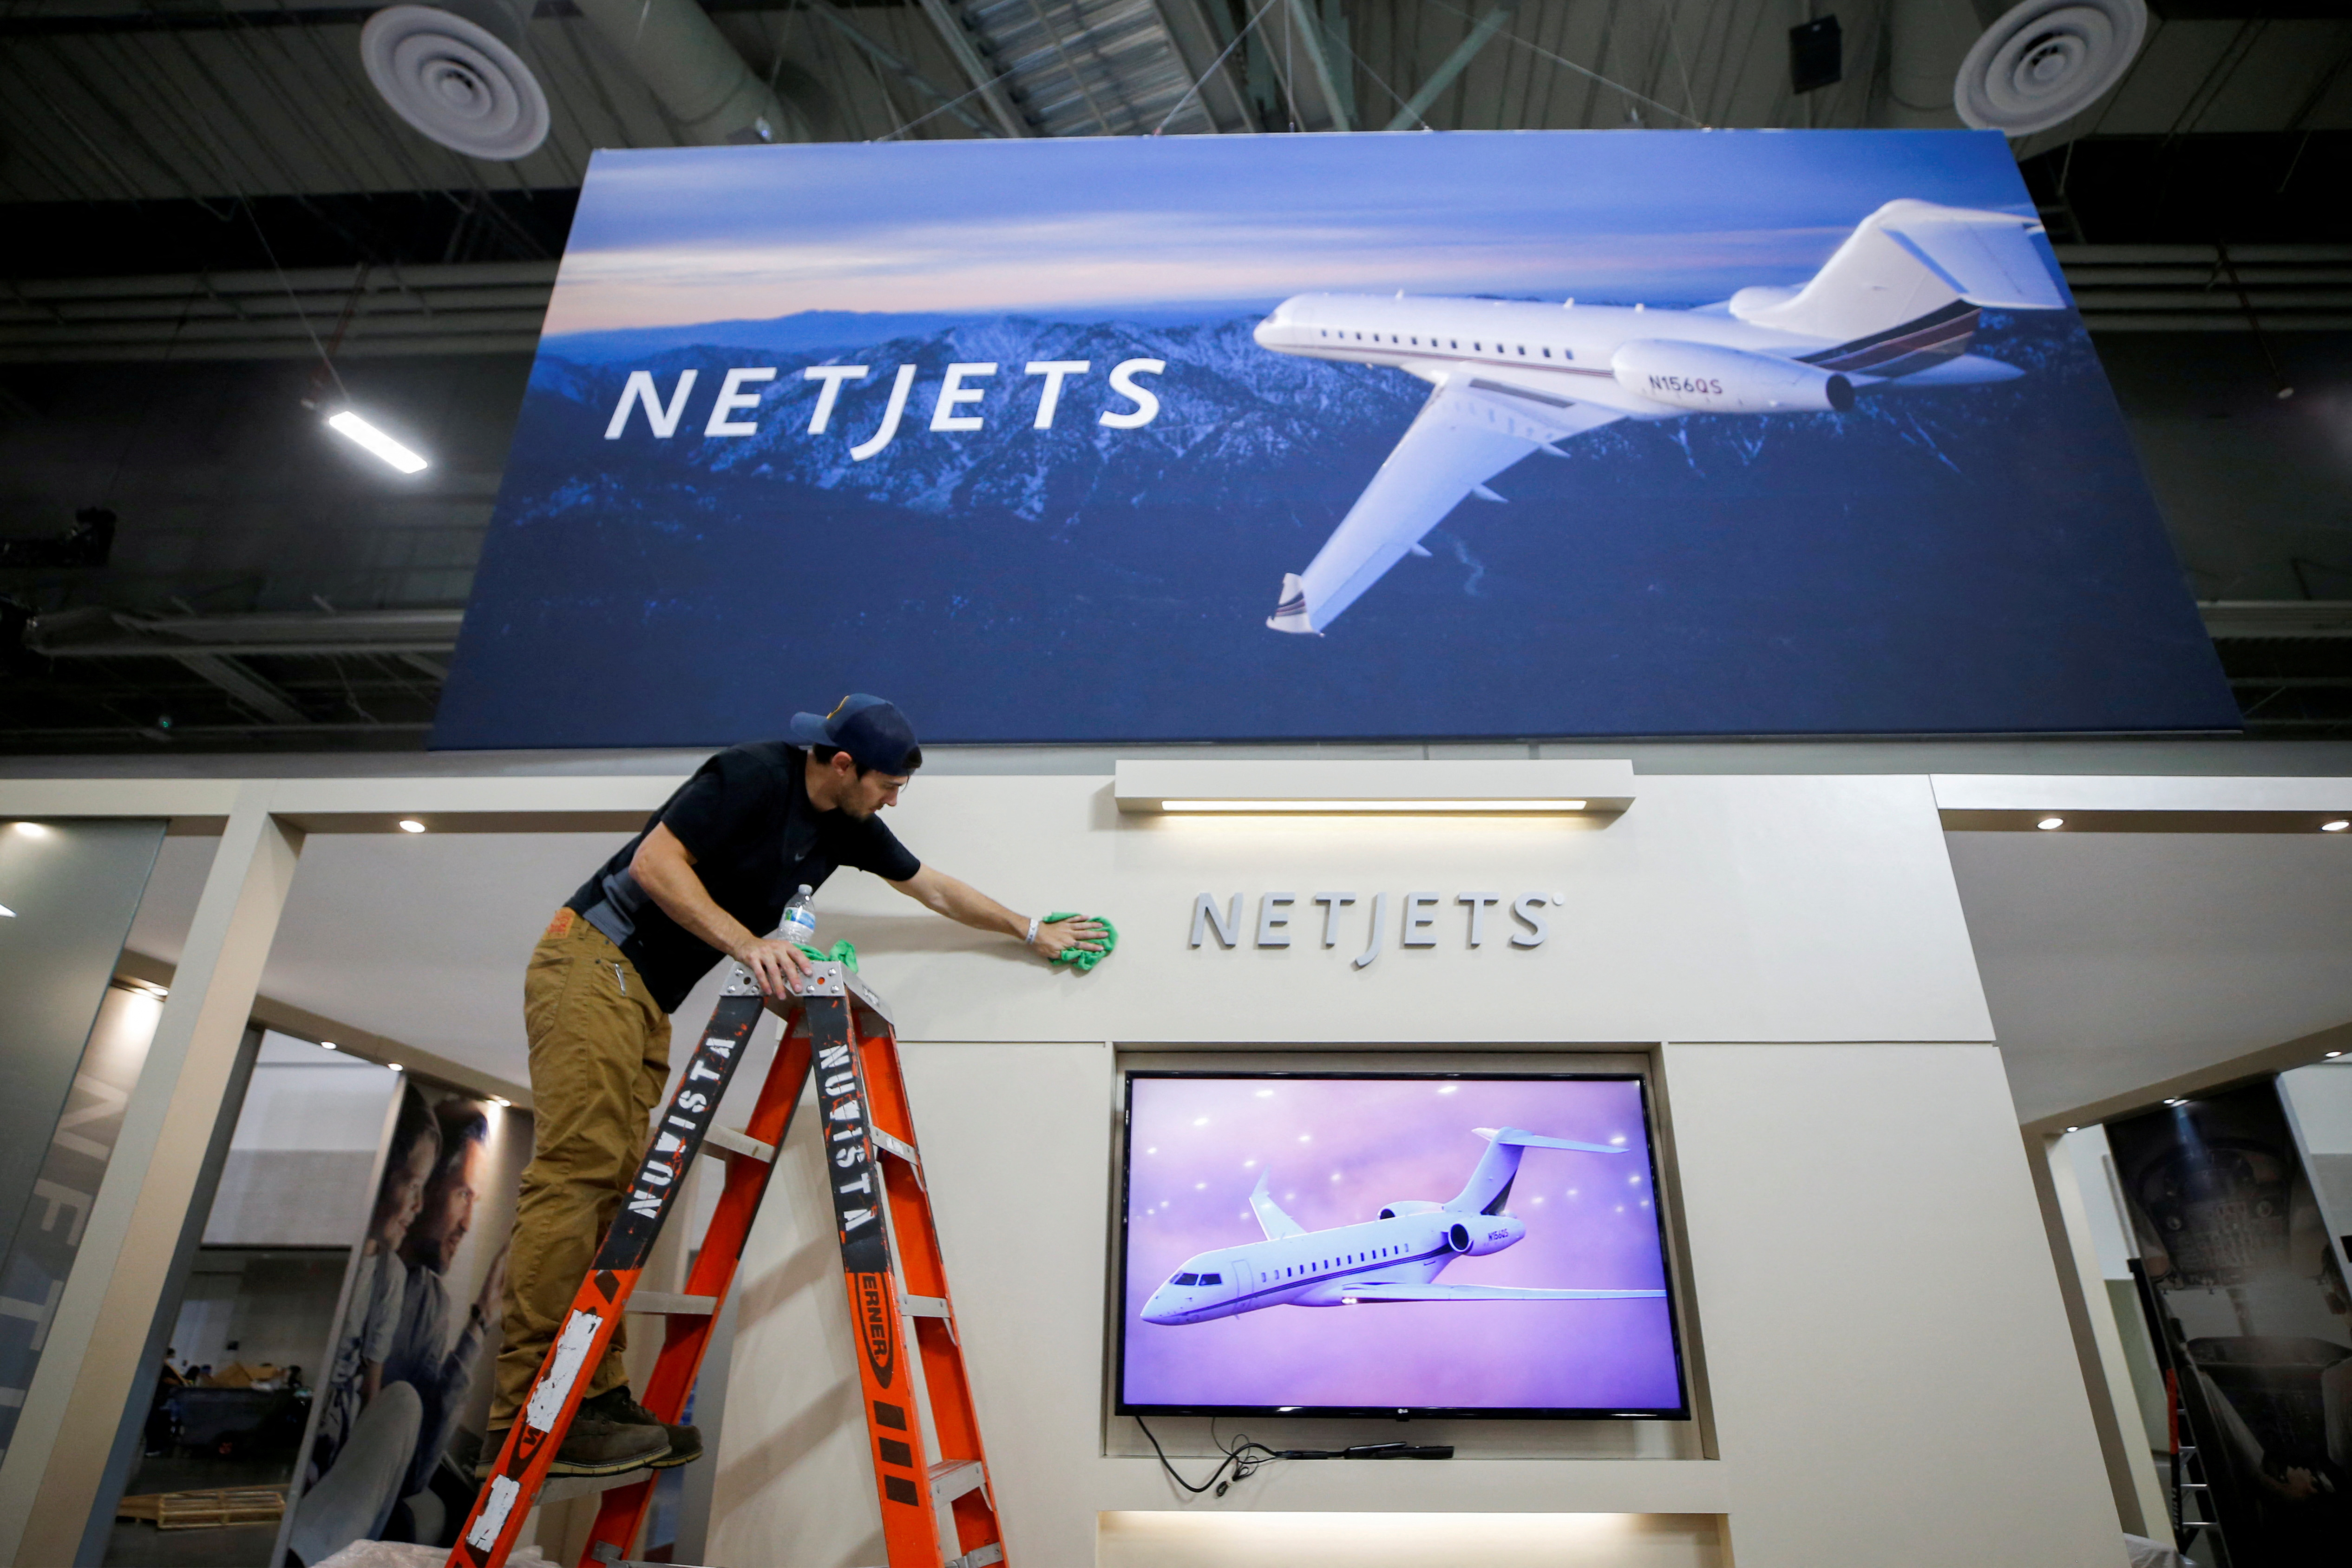 Companies prepare for World's largest air show for business jets in Las Vegas